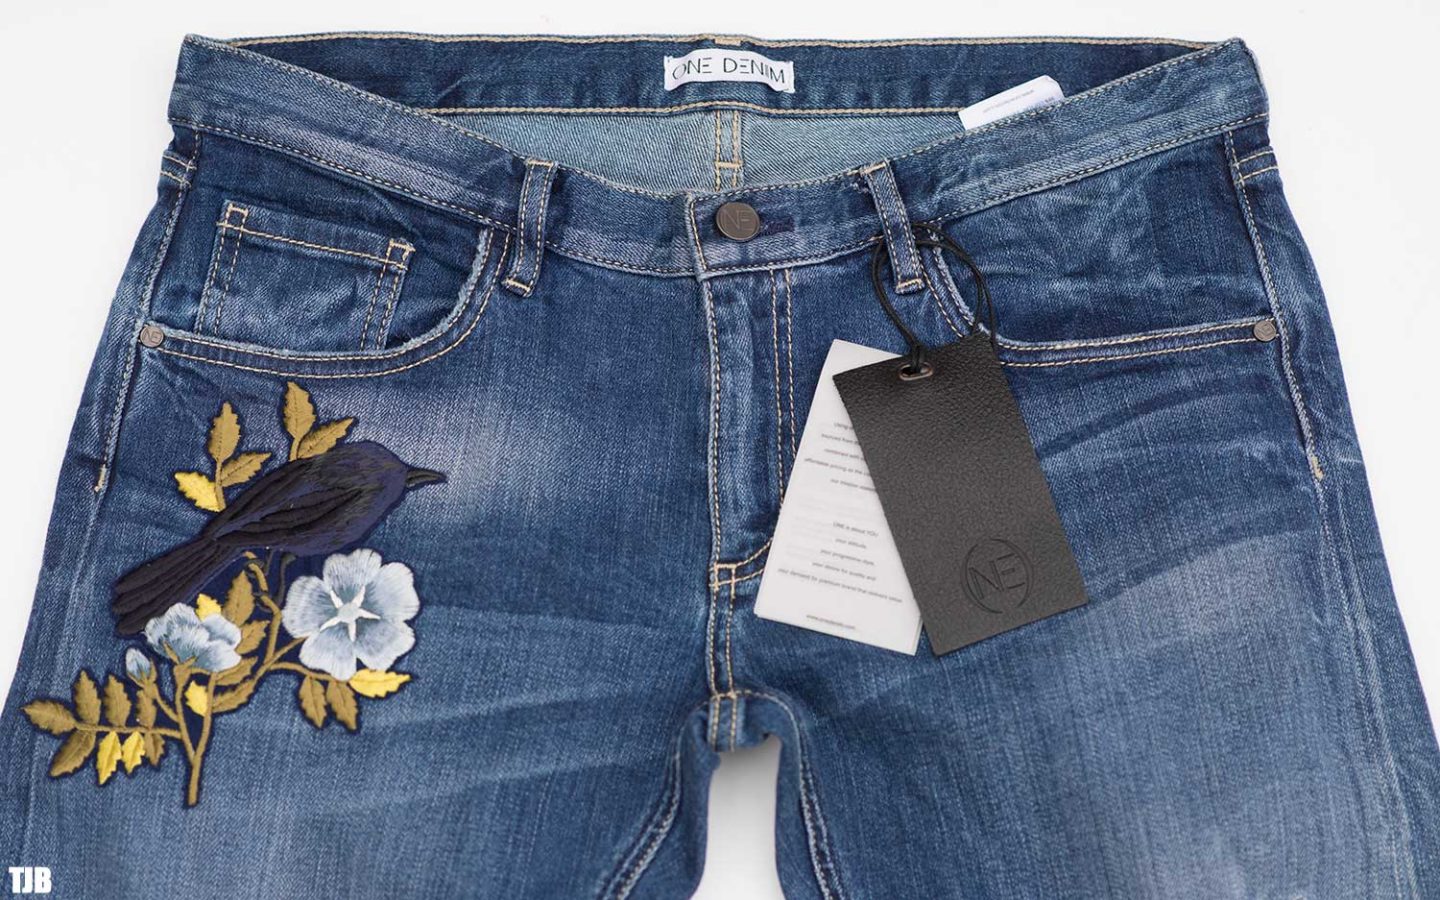 ONE DENIM Women’s Embroidered Jeans & Shorts Review